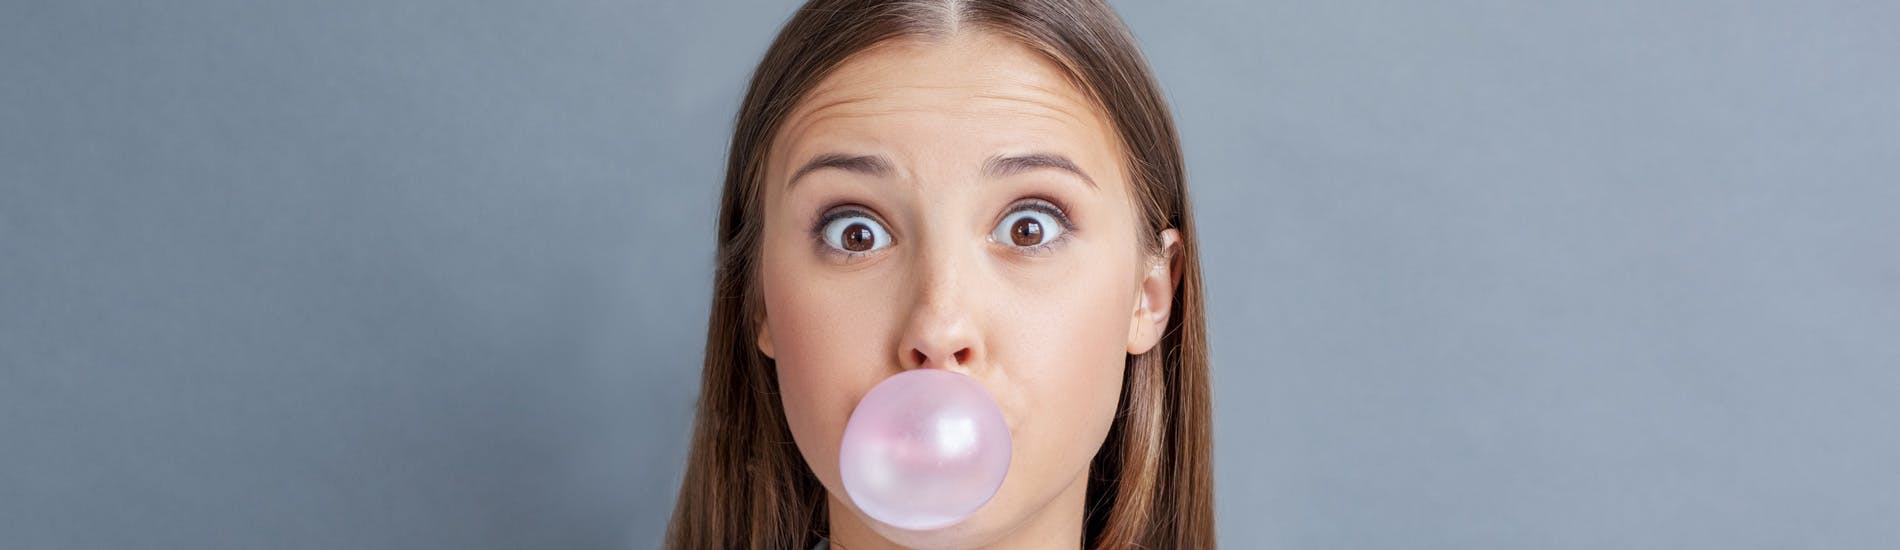 woman chewing gum against a gray background